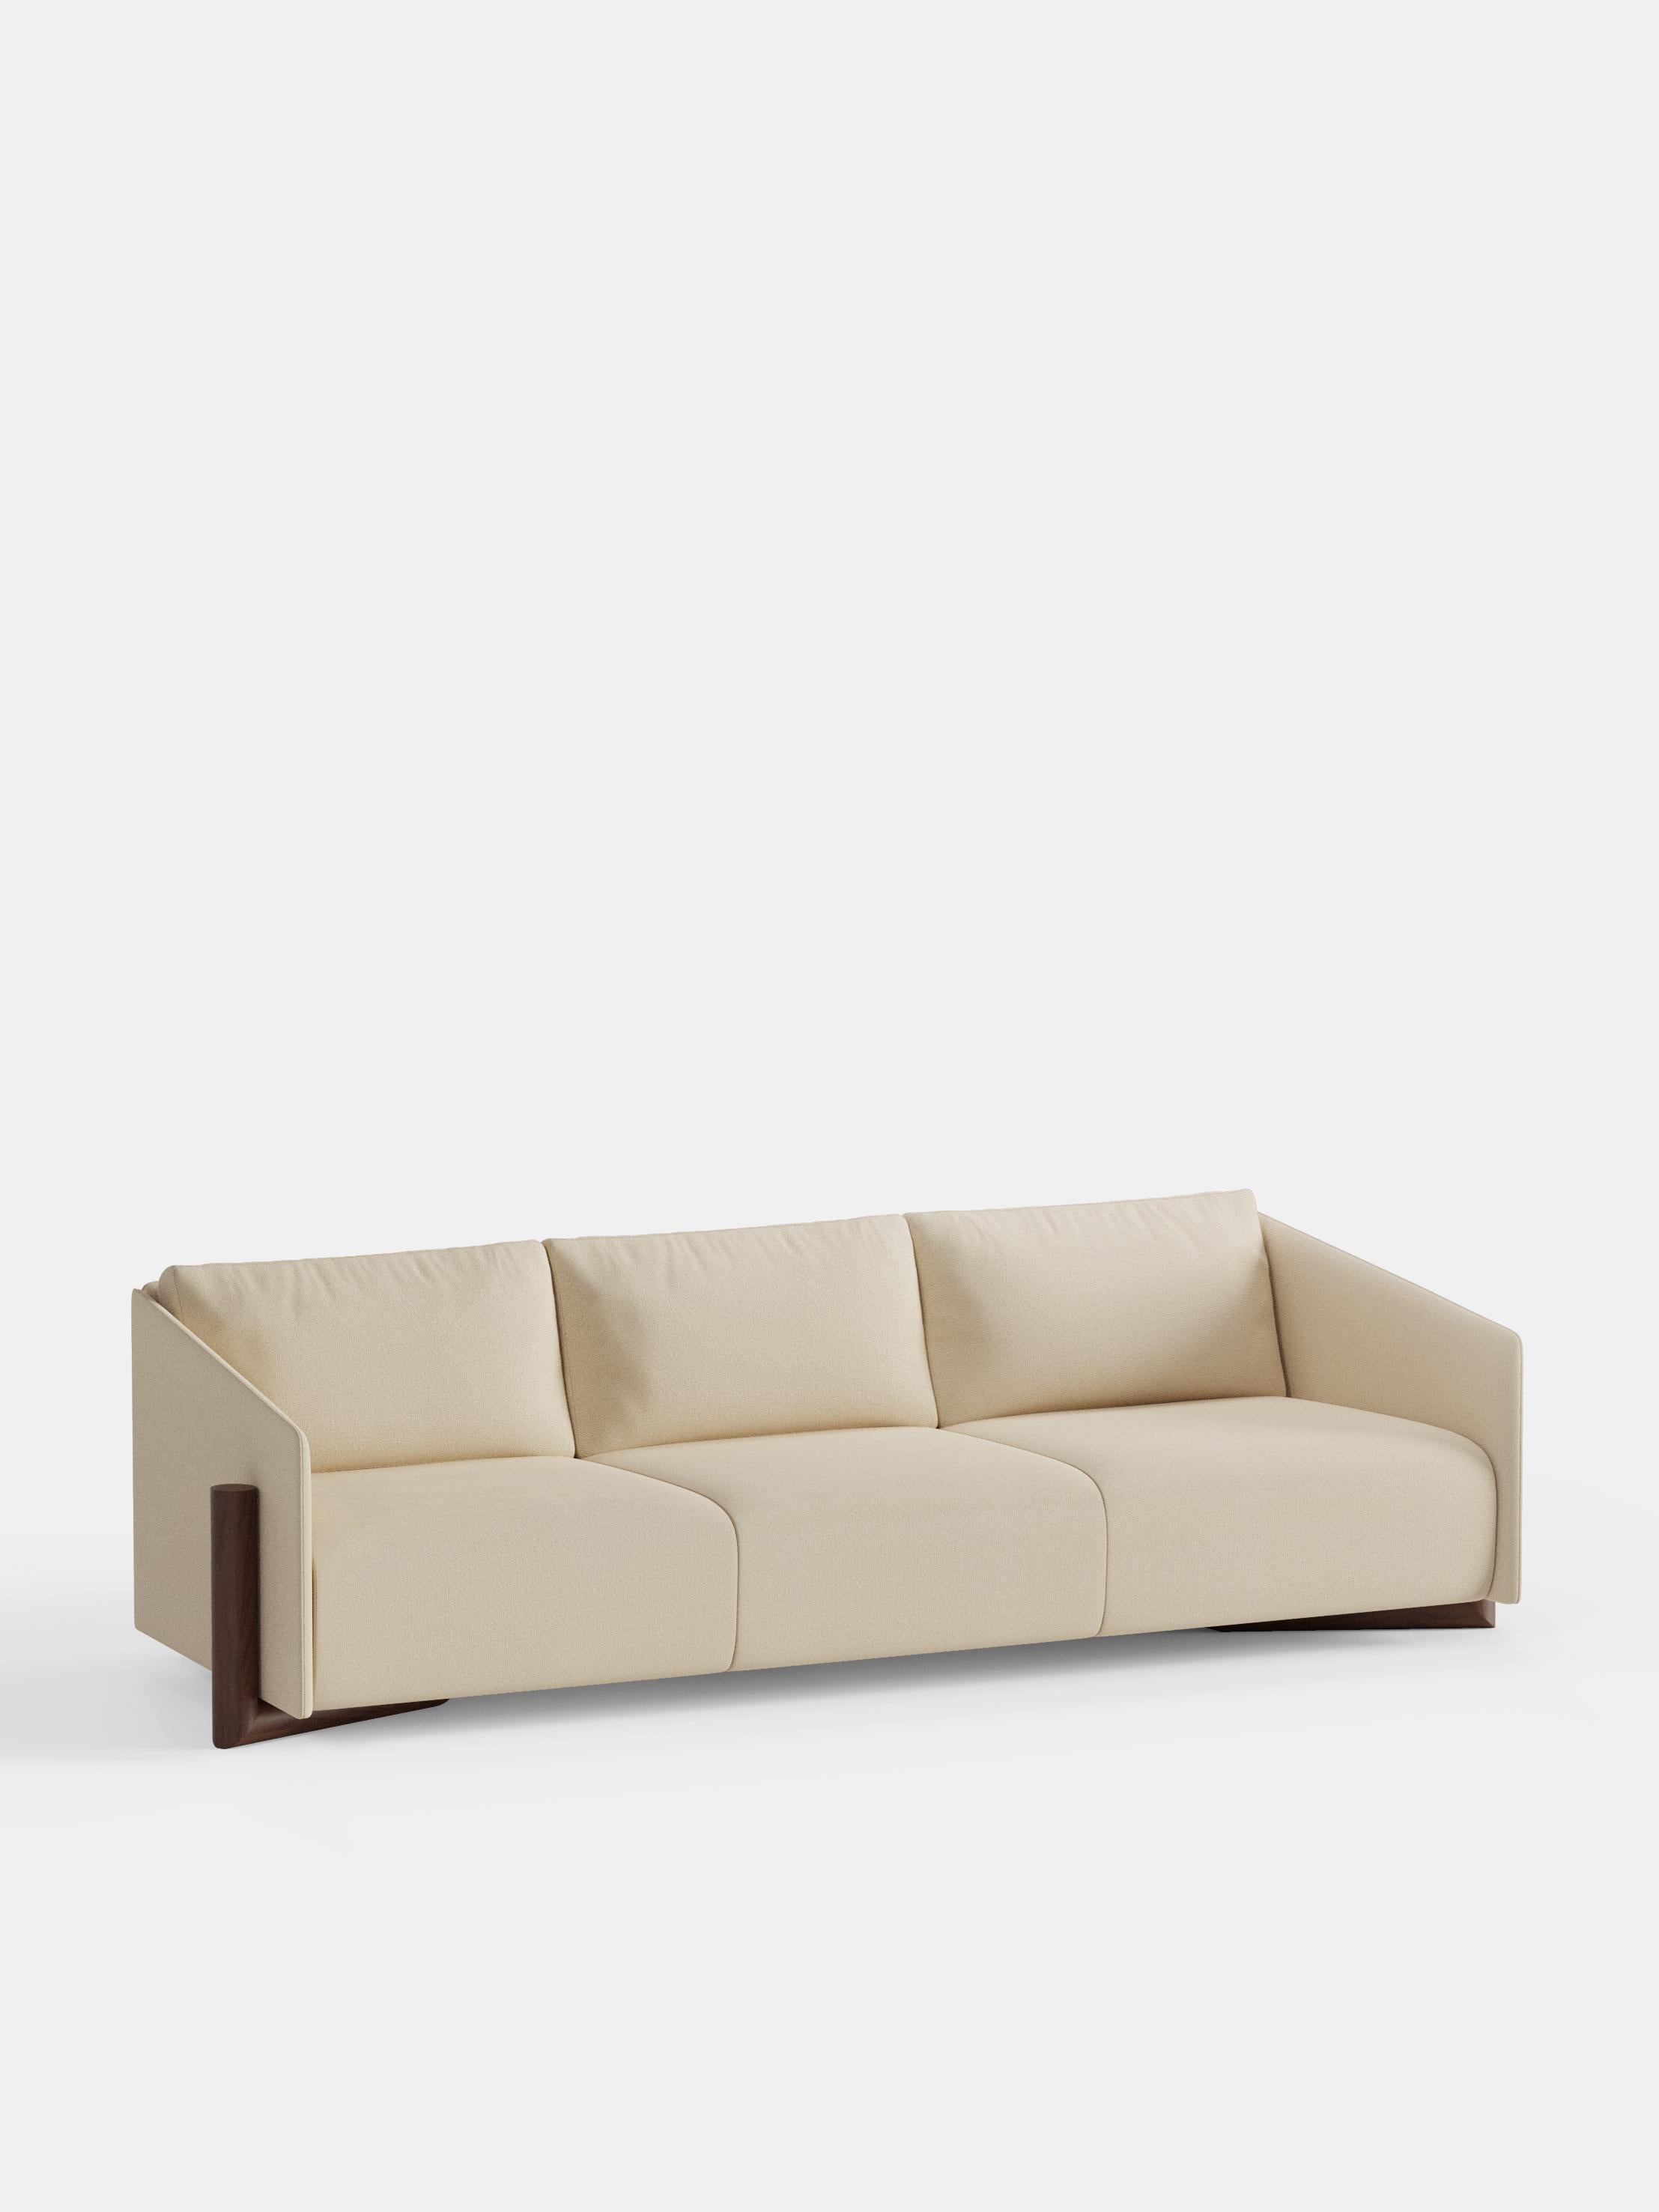 Cream Timber 4 Seater Sofa by Kann Design
Dimensions: D 104.5 x W 260 x H 75 cm.
Materials: Solid wood, elastic belts, HR foam, fabric upholstery Kvadrat Vidar 1511 (94% wool, 6% nylon).
Available in other fabrics.

The strong presence of textile in